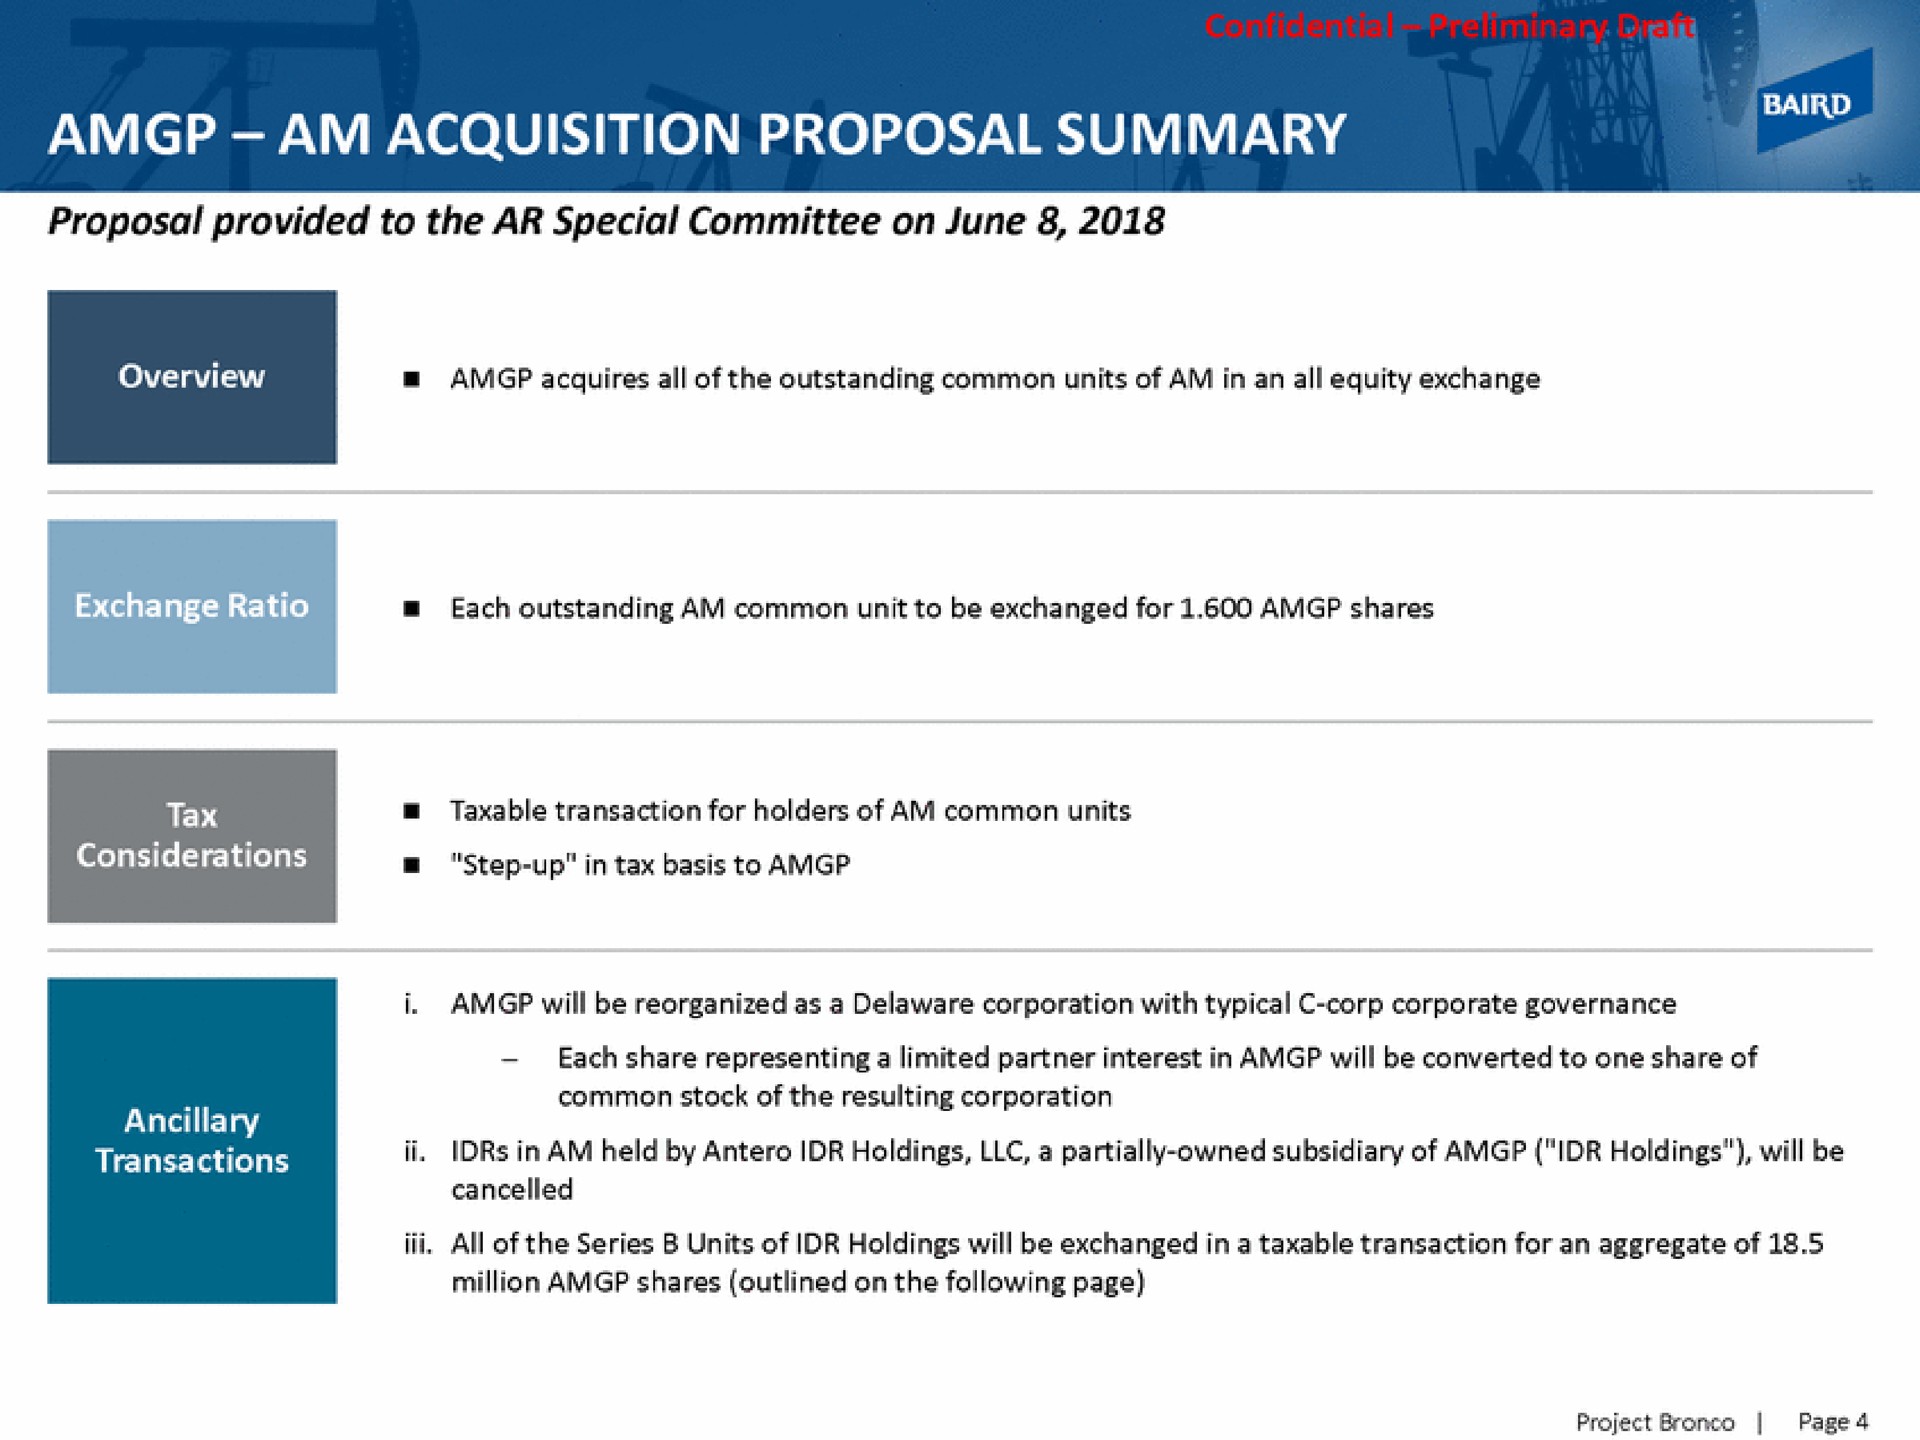 am acquisition proposal summary | Baird